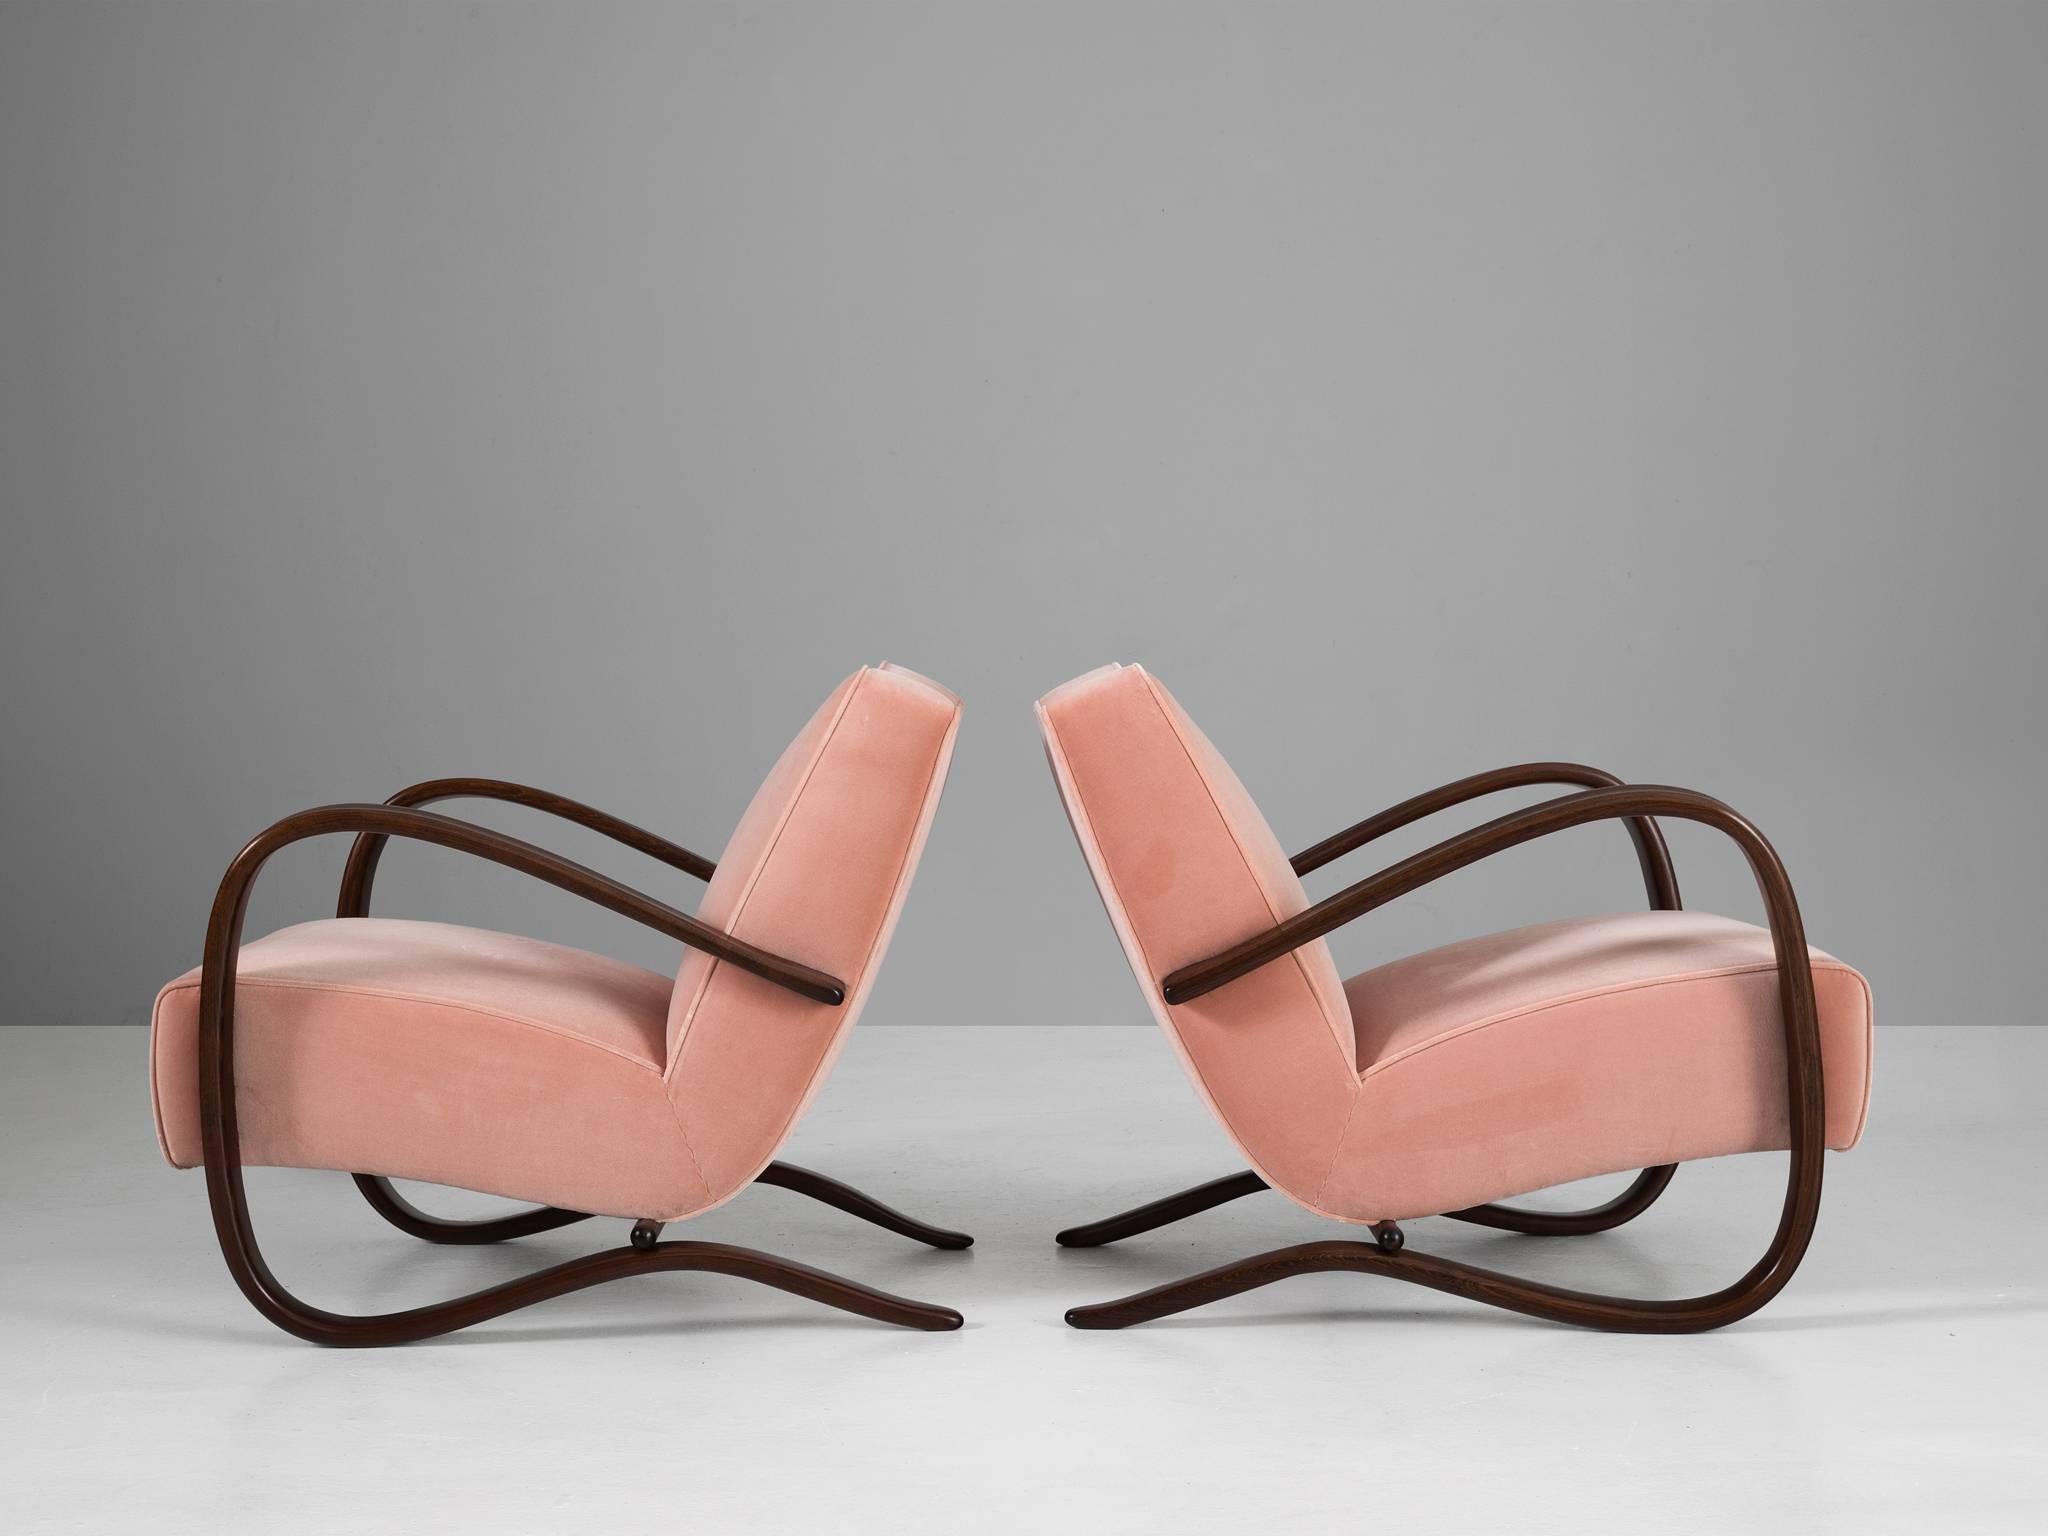 Jindrich Halabala, set of armchairs, Czech Republic, 1930s. 

This extraordinary pair of Halabala chairs is part of the customized midcentury design collection. The easy chairs are upholstered with pink velvet fabric upholstery in our own